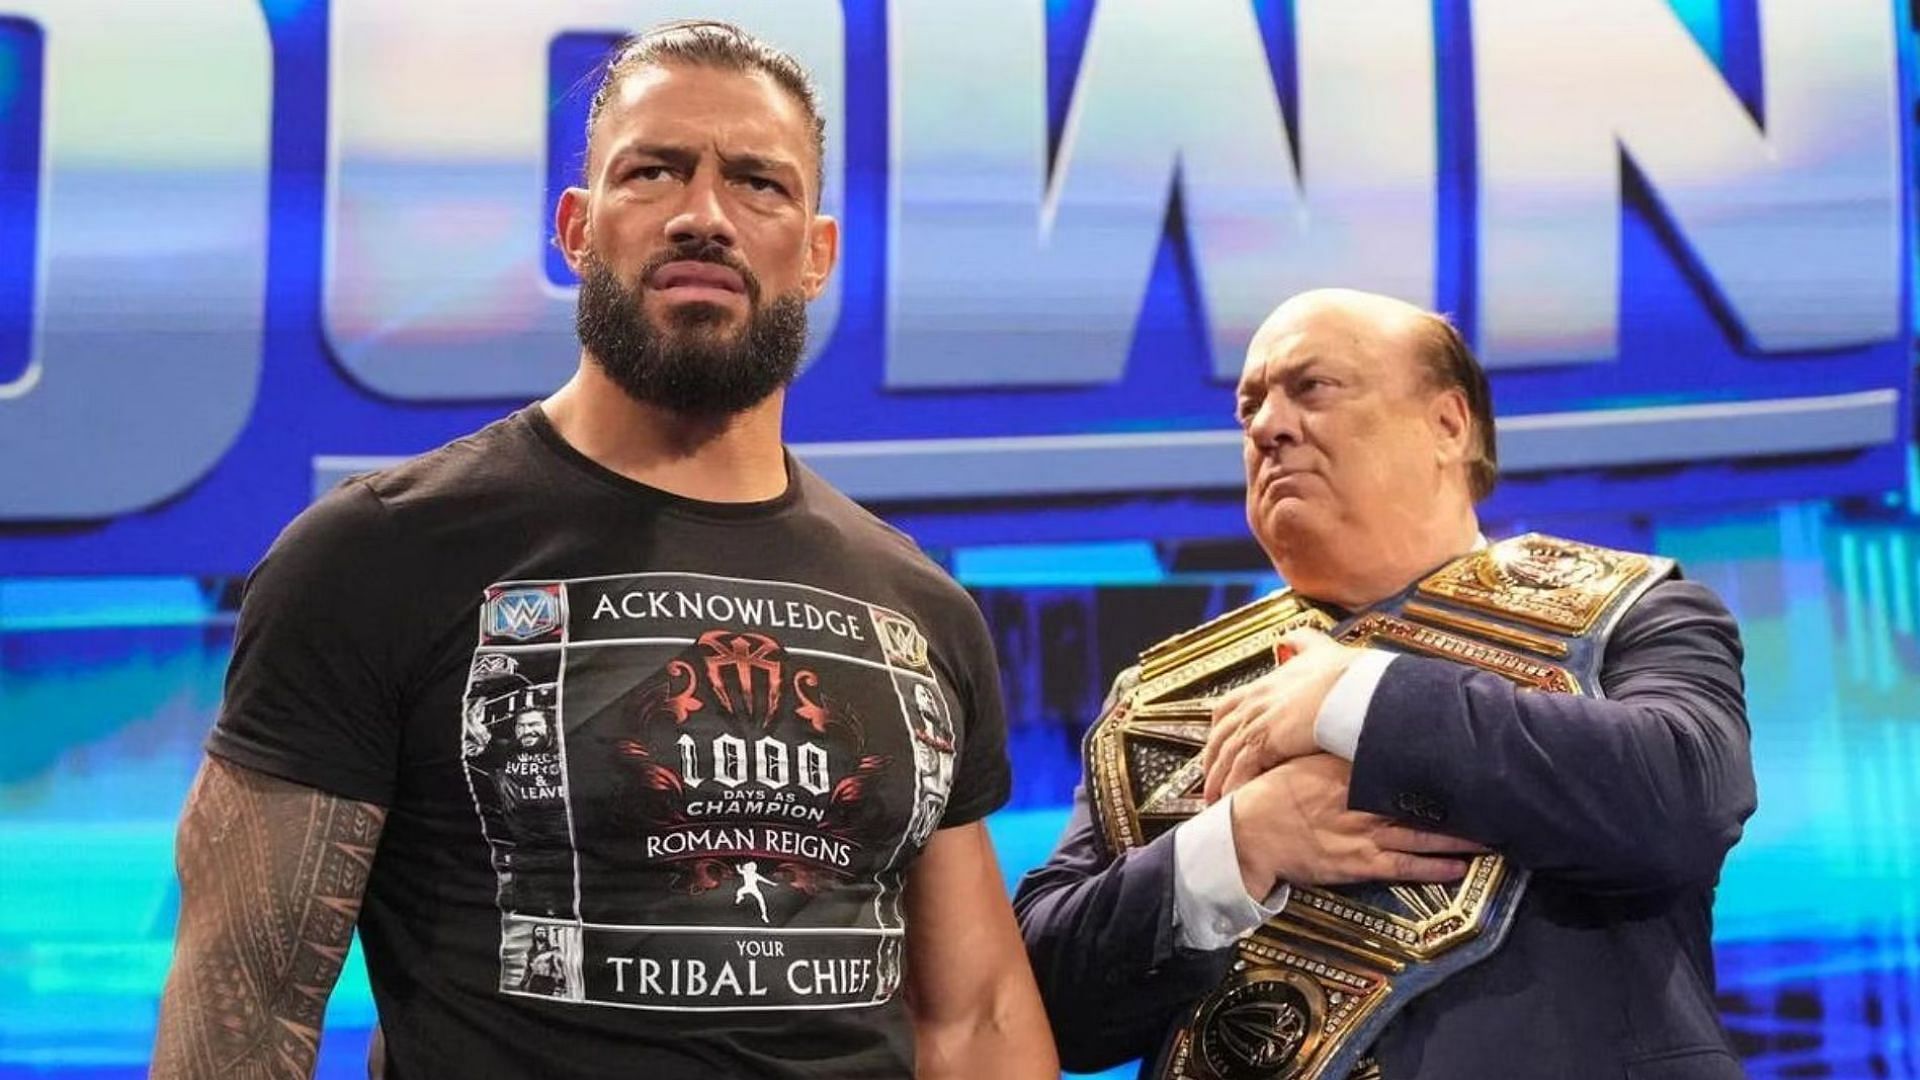 SmackDown airs live tonight in Ohio.